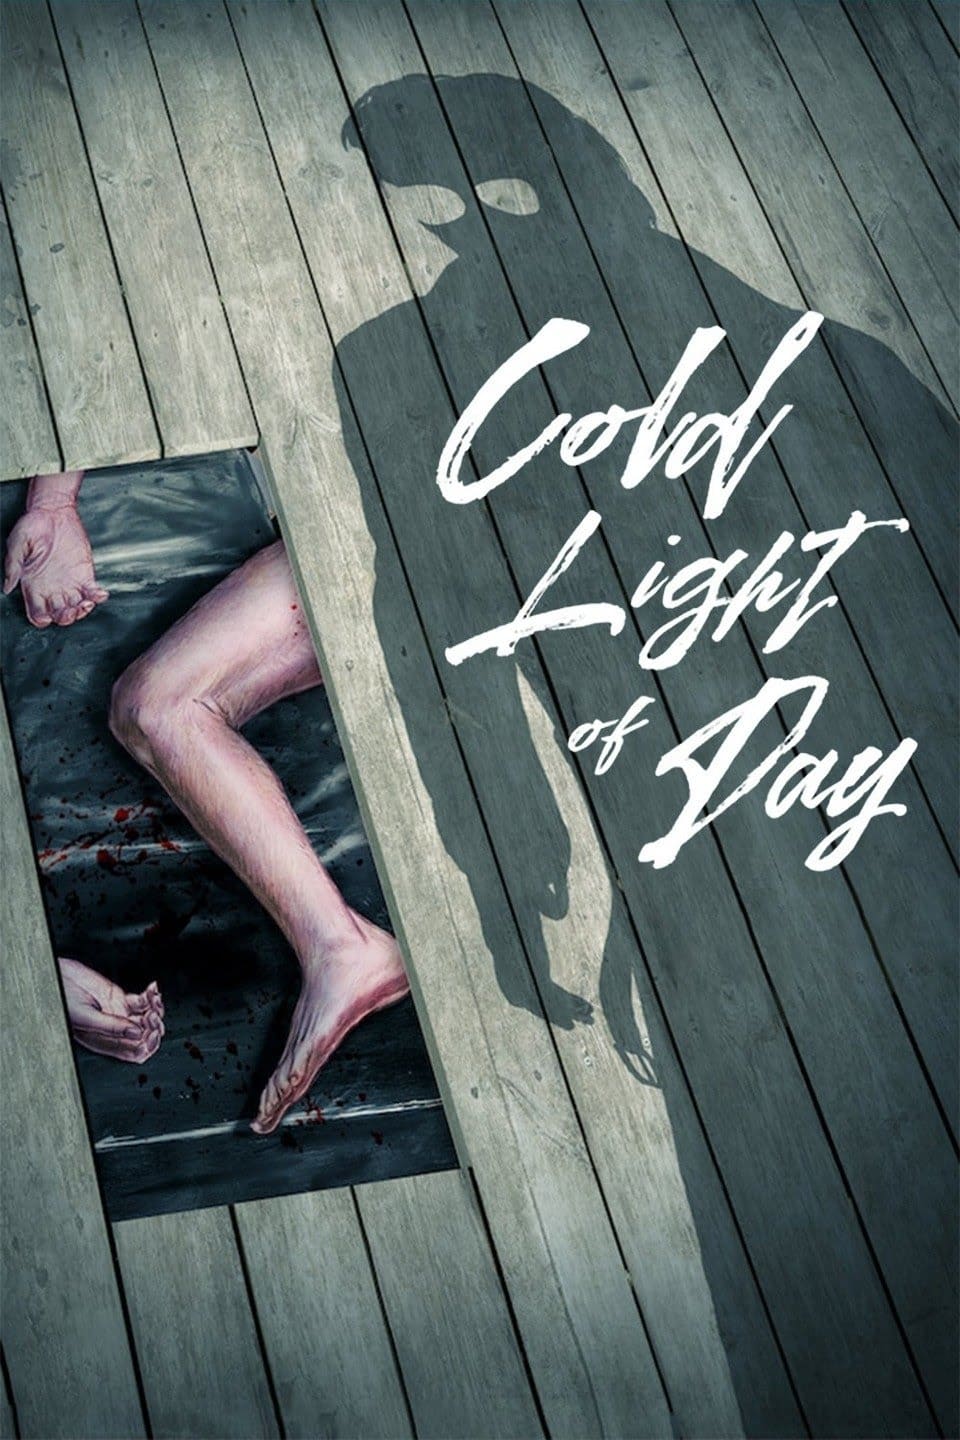 Cold Light of Day (1989)